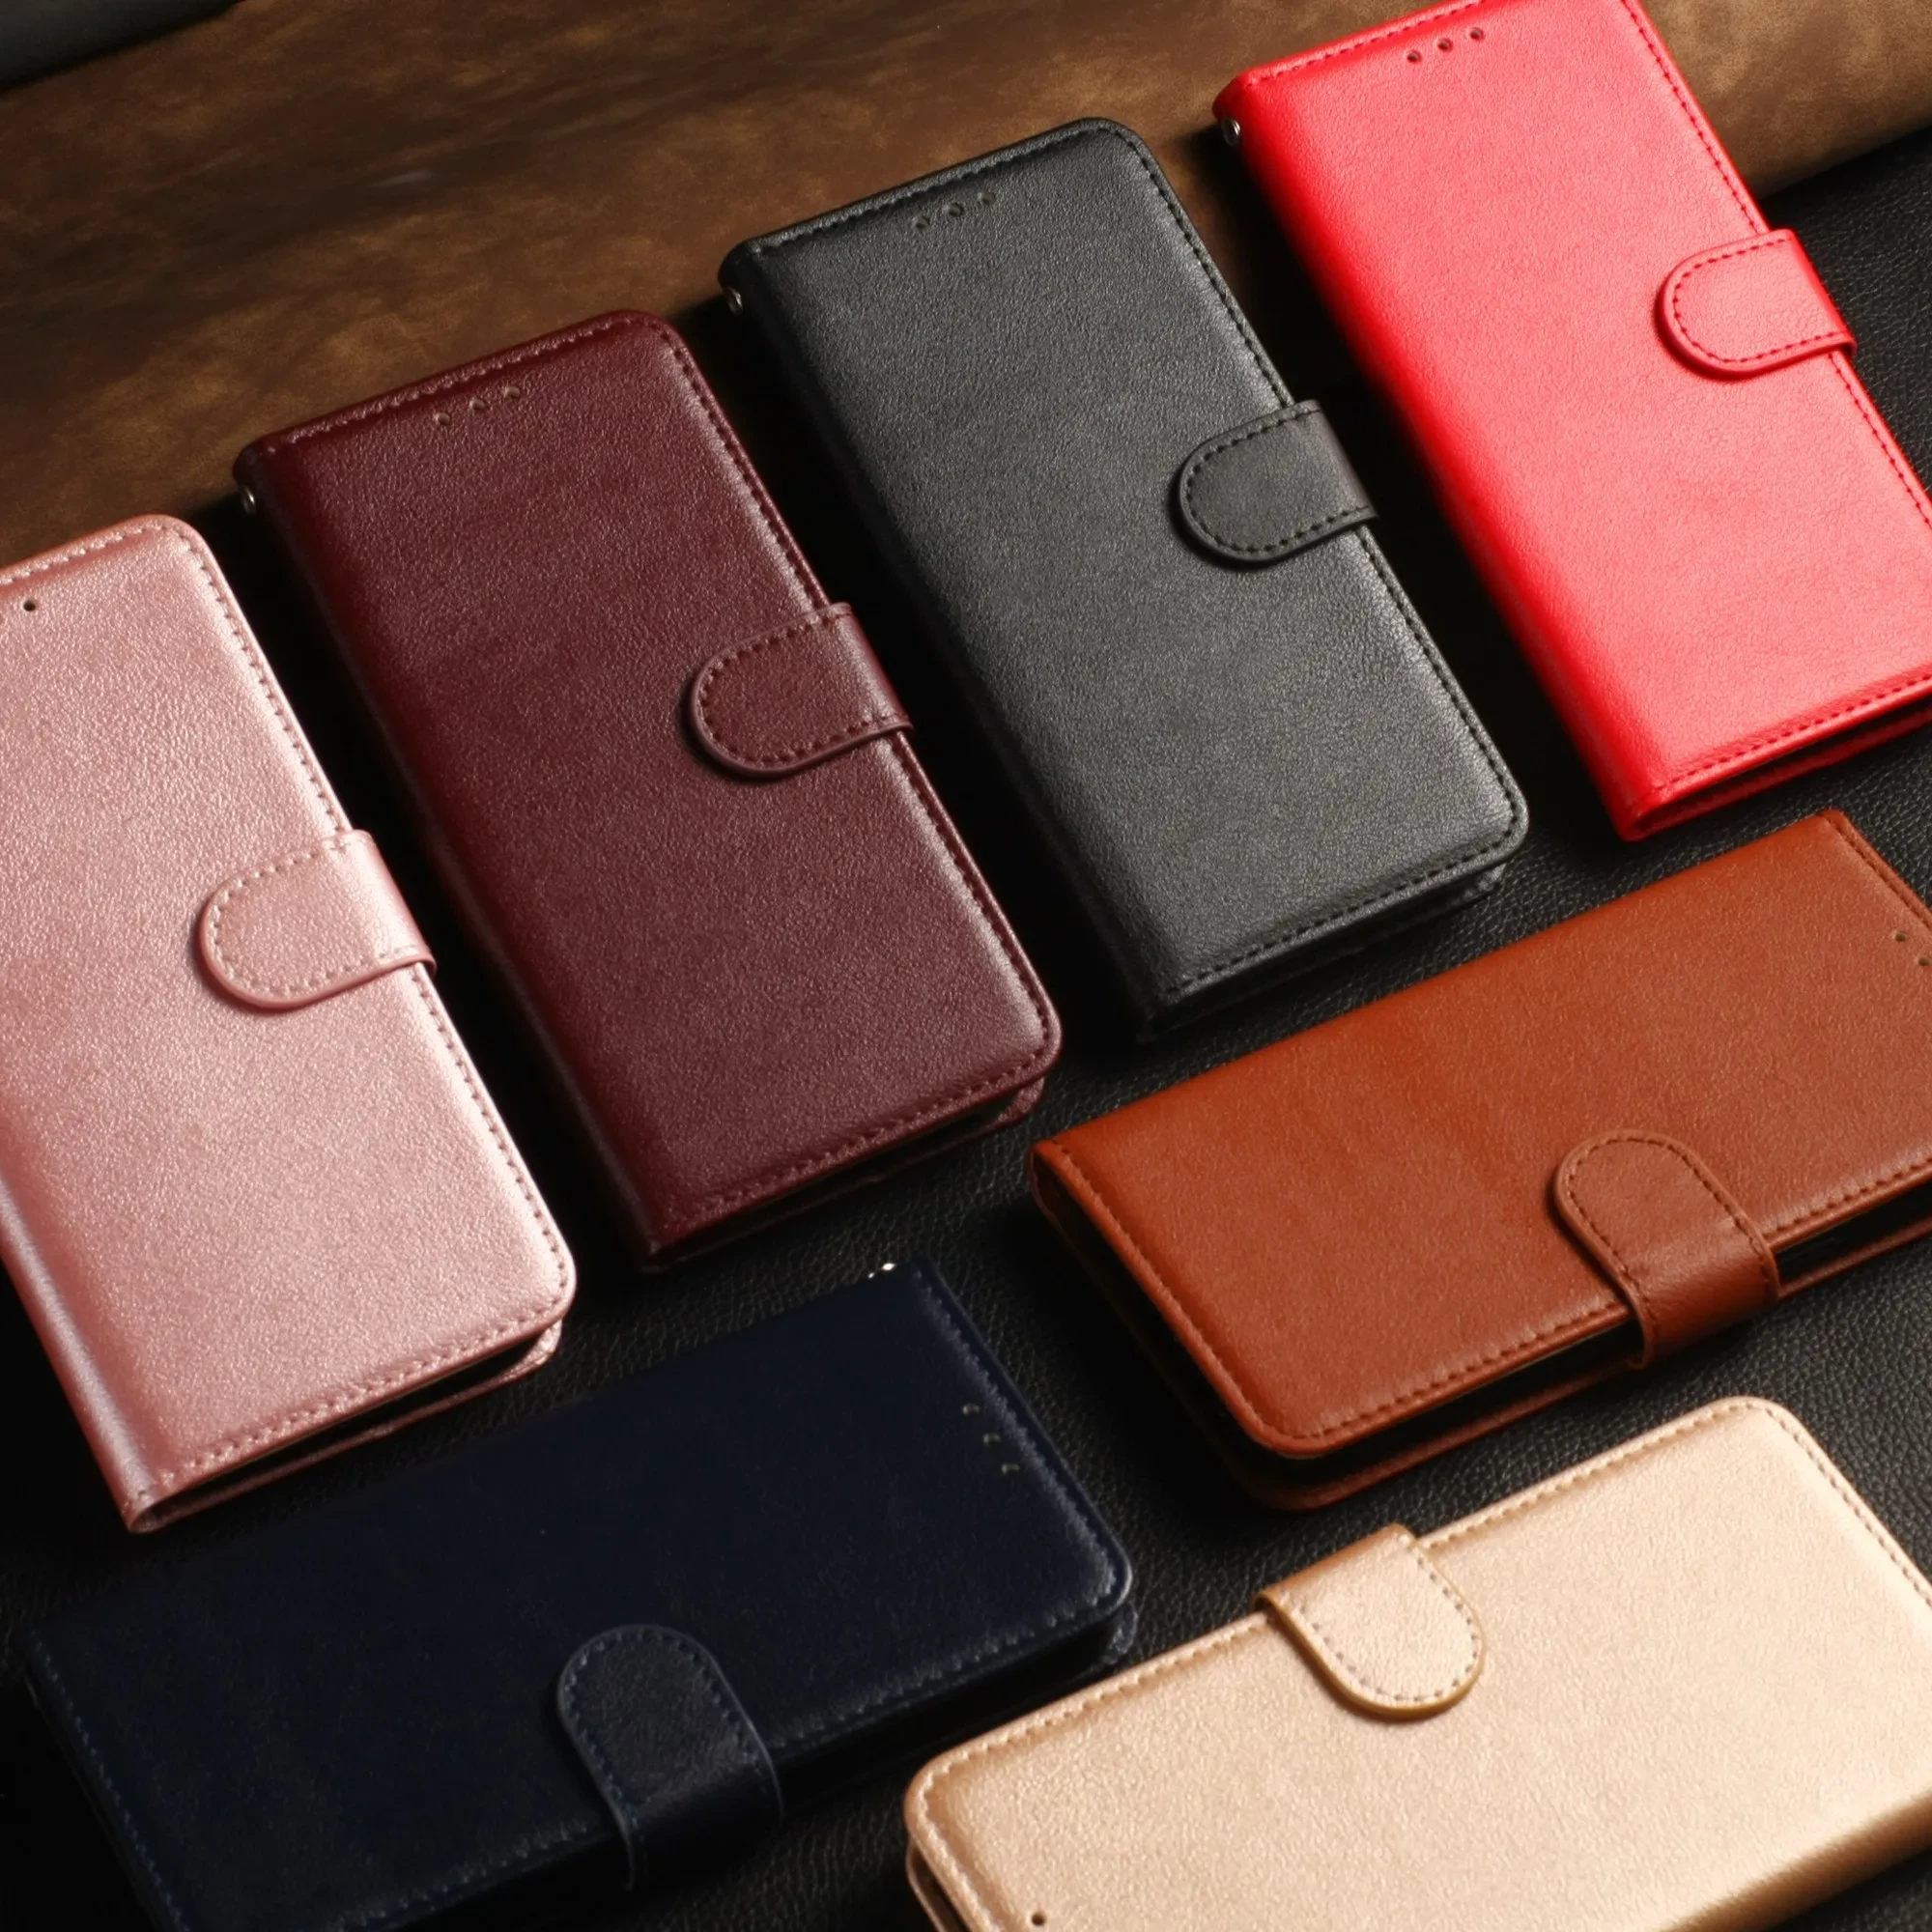 Leather Case Protect Cover For iPhone 13 12 Mini 11 Pro Max X XR XS Max 7 8 6 6s Plus 5 5s SE 2020 Stand Coque Flip Wallet Funda